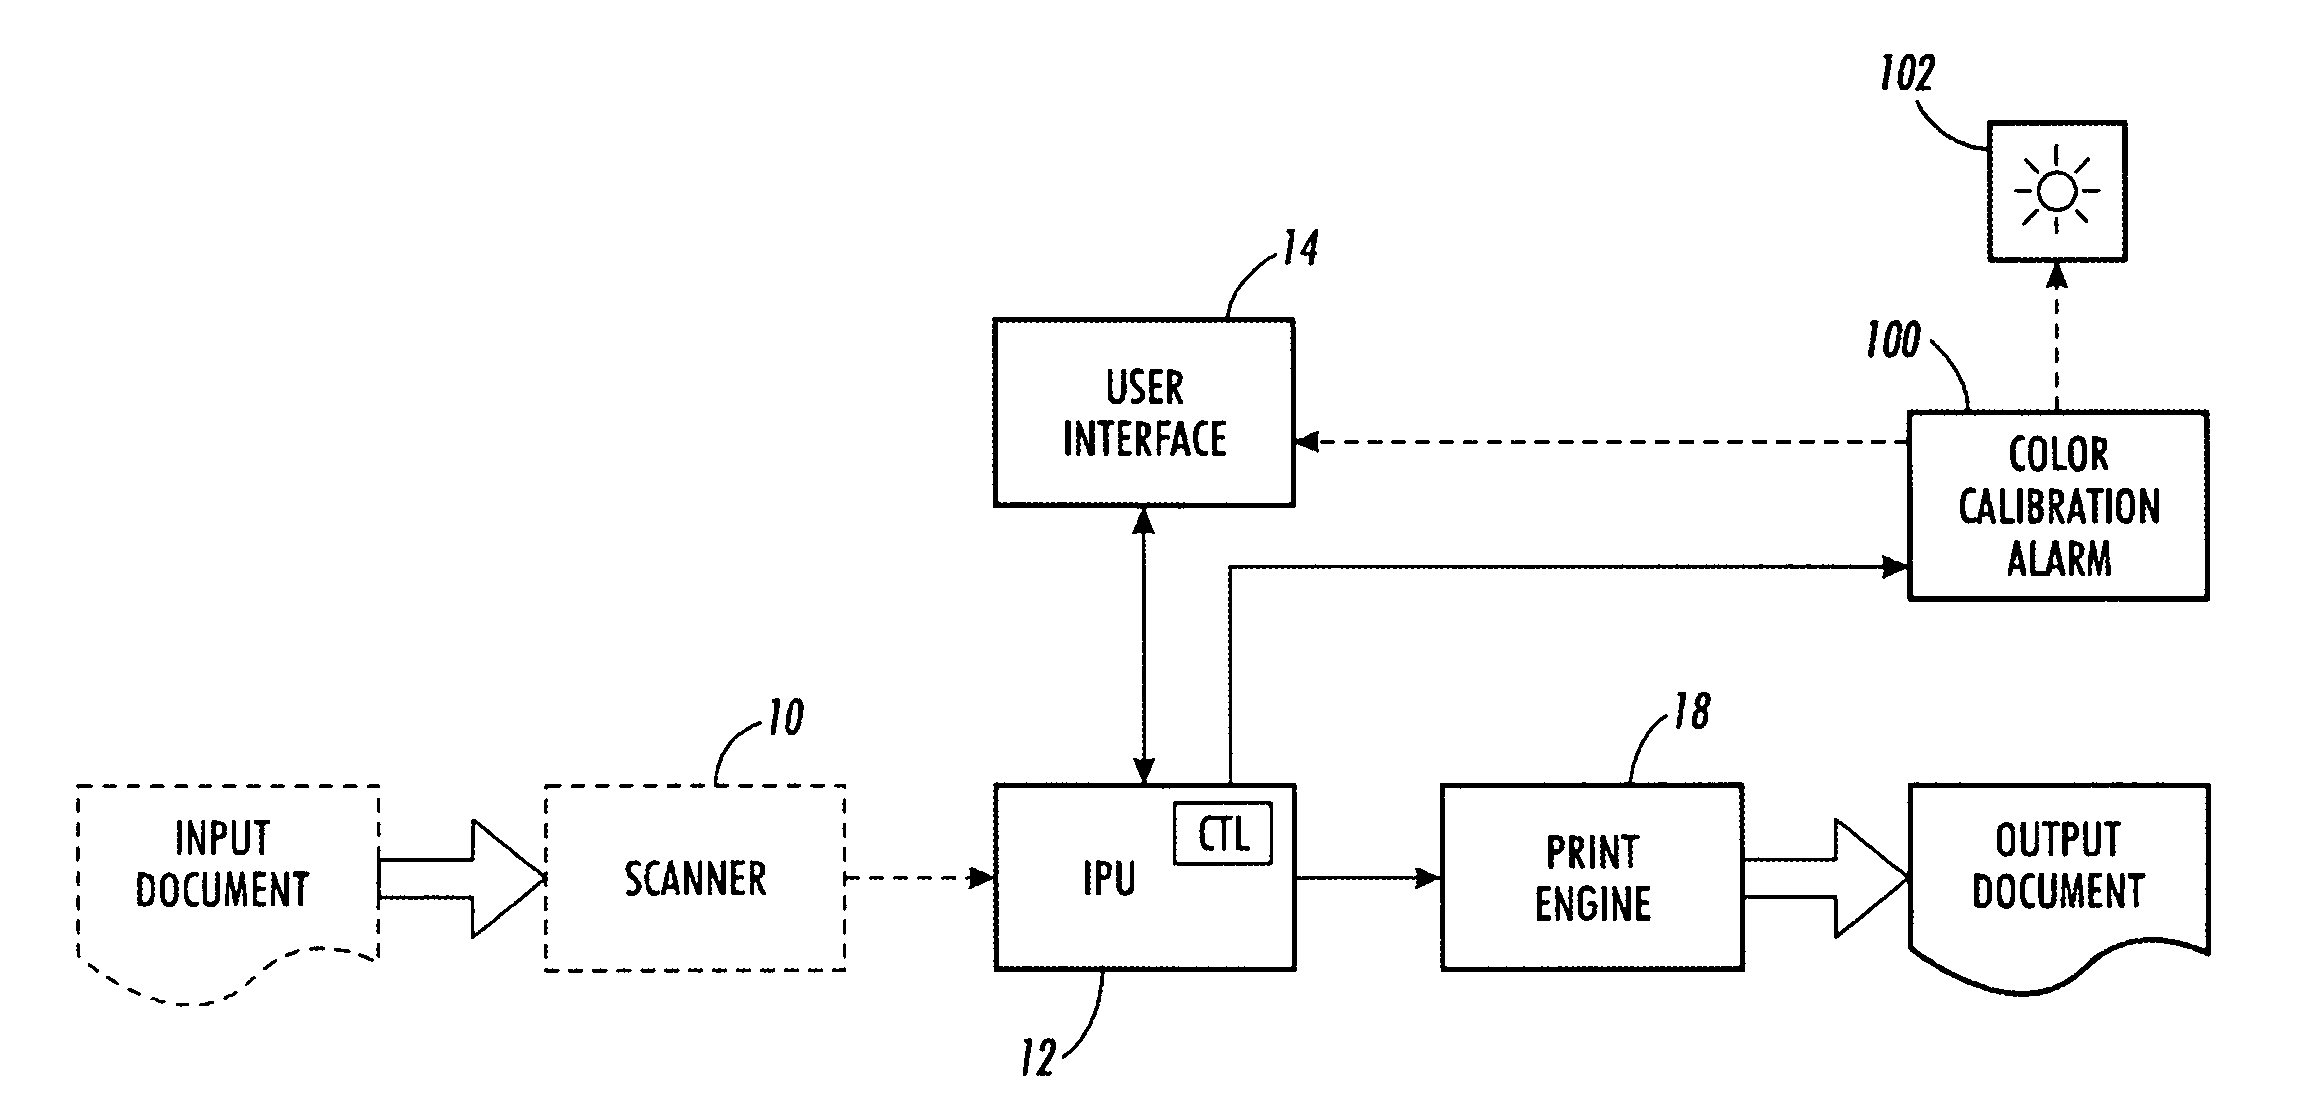 Color calibration alarm apparatus and method for use in an image-rendering device